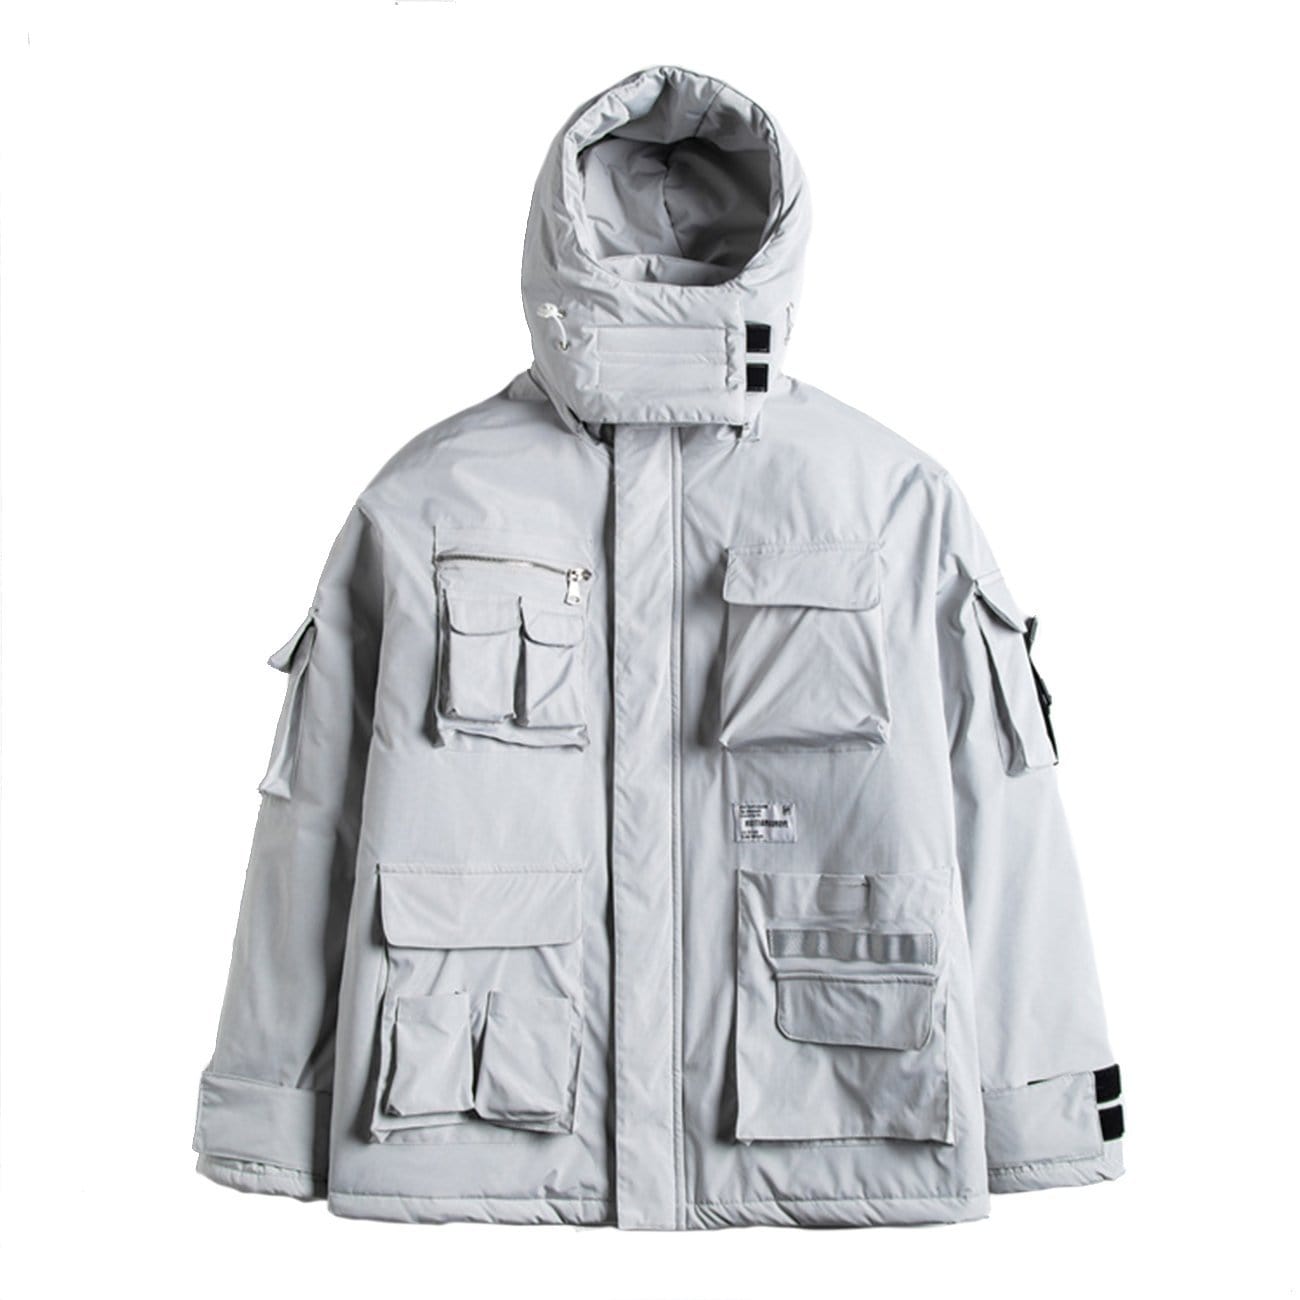 TO Removable Multi Pockets Winter Coat